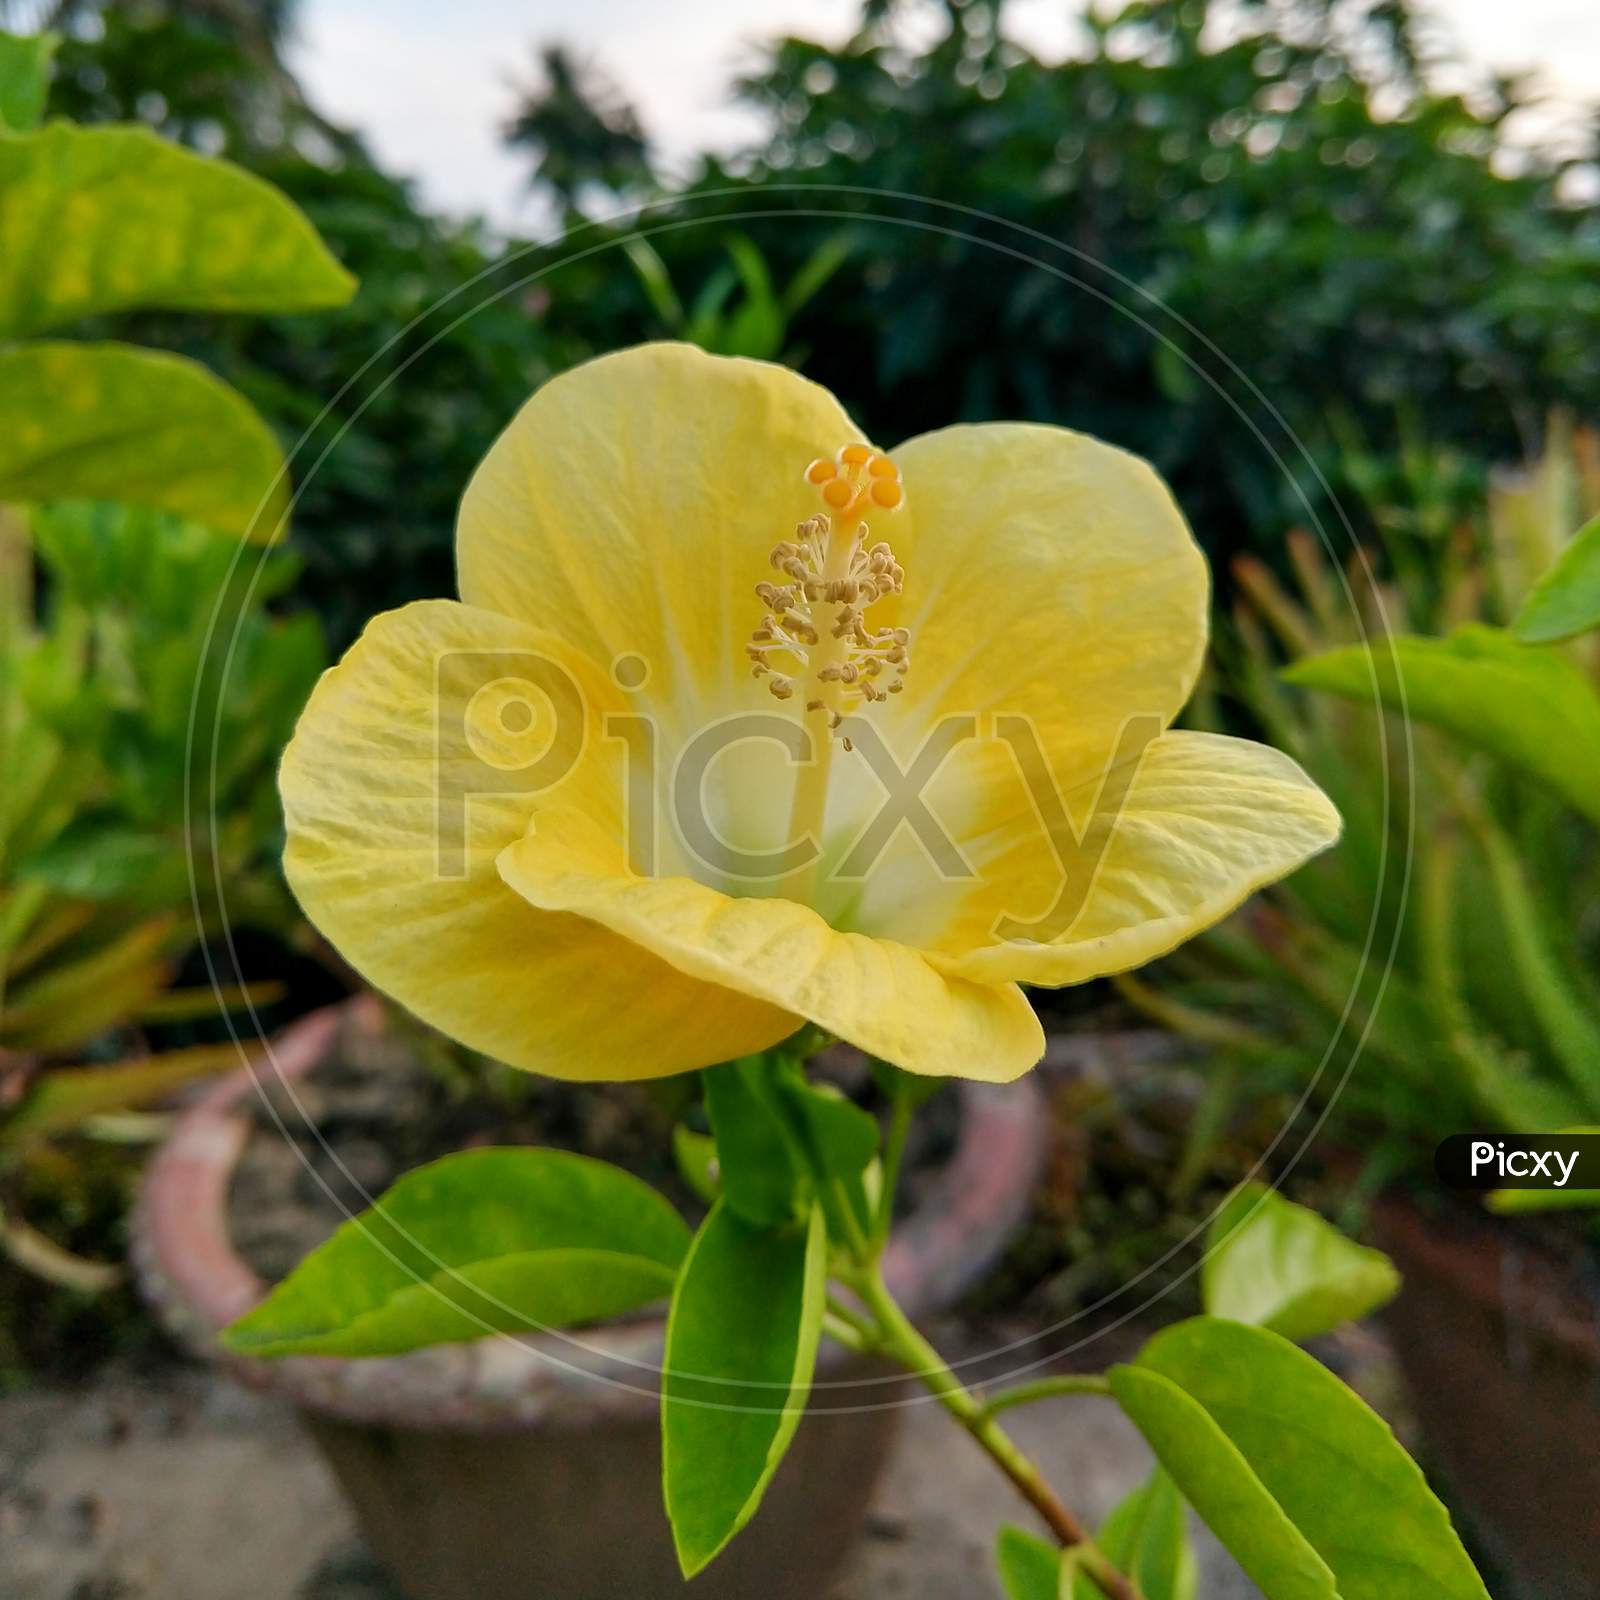 A Beautiful Yellow Hibiscus. Close Up Front View.